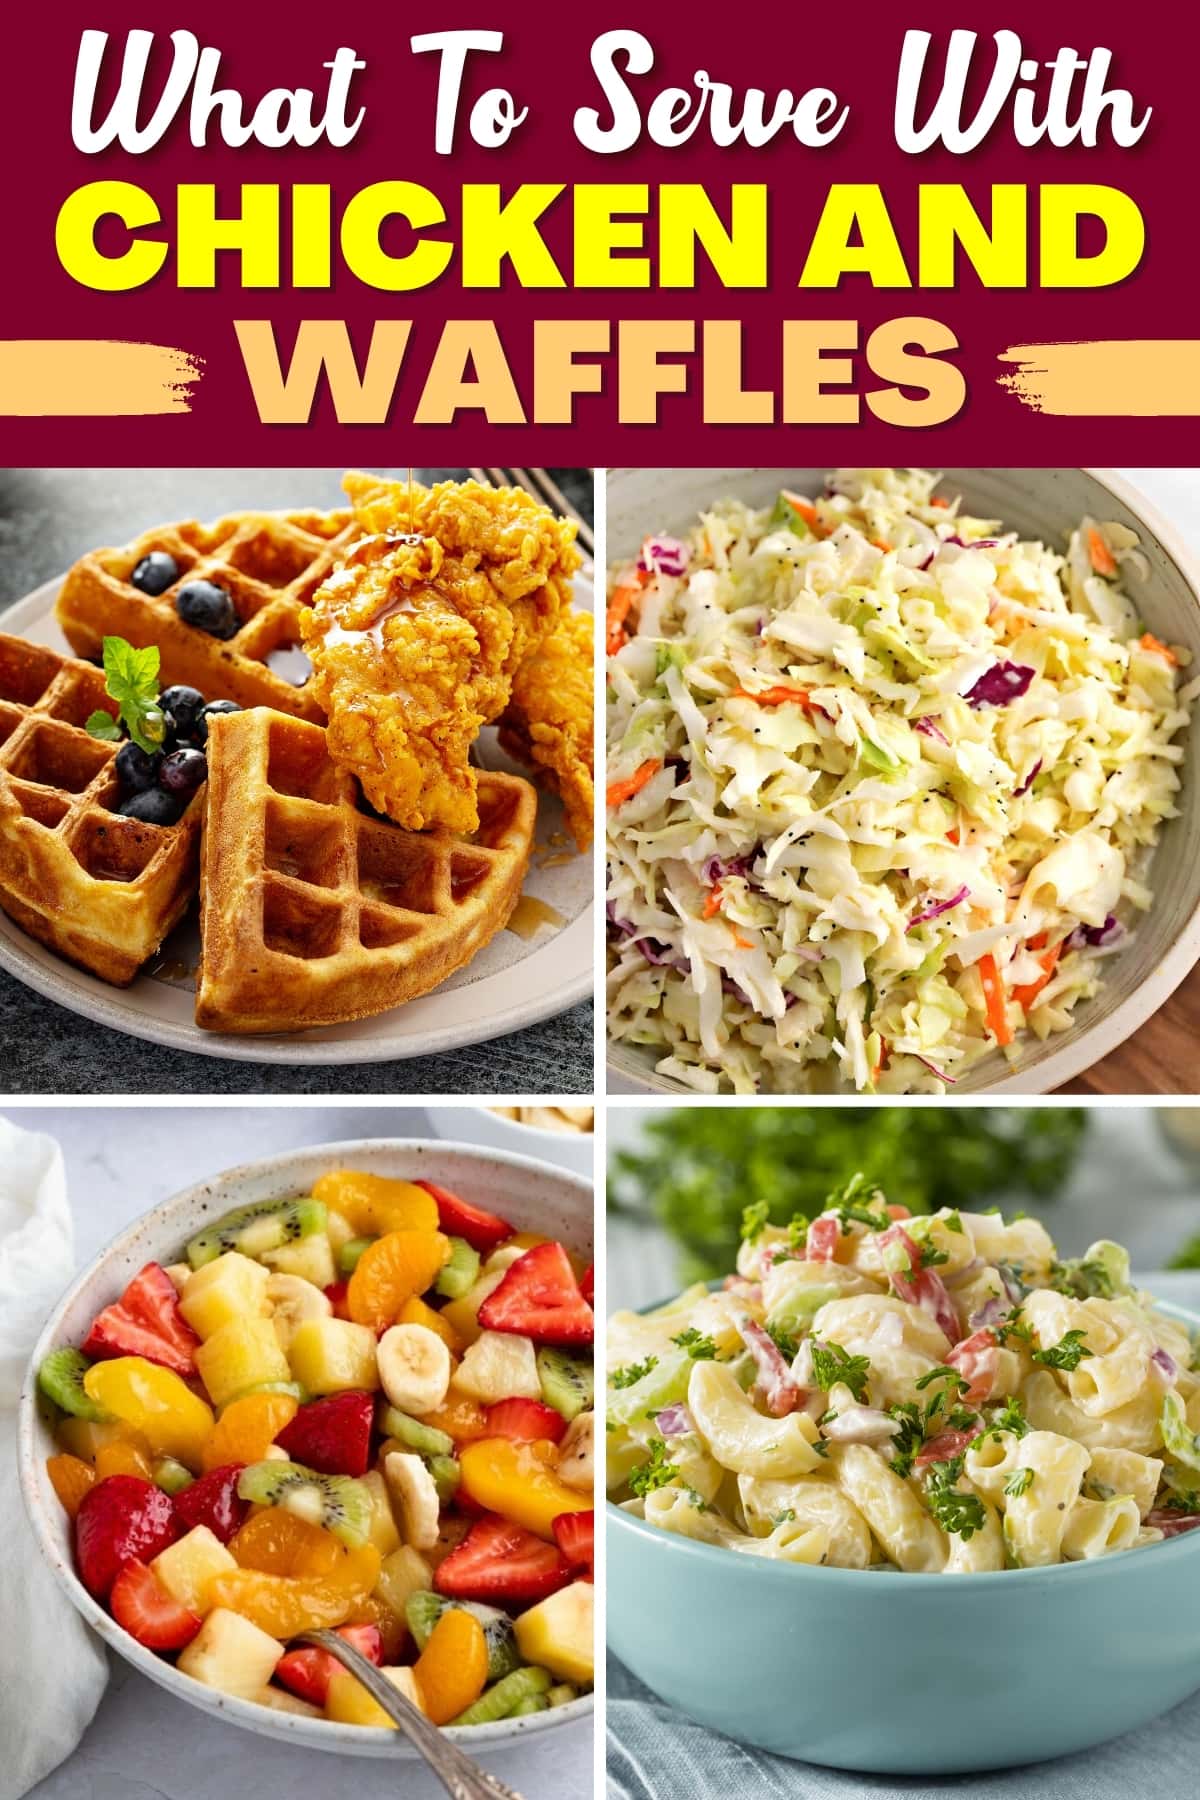 What to Serve with Chicken and Waffles